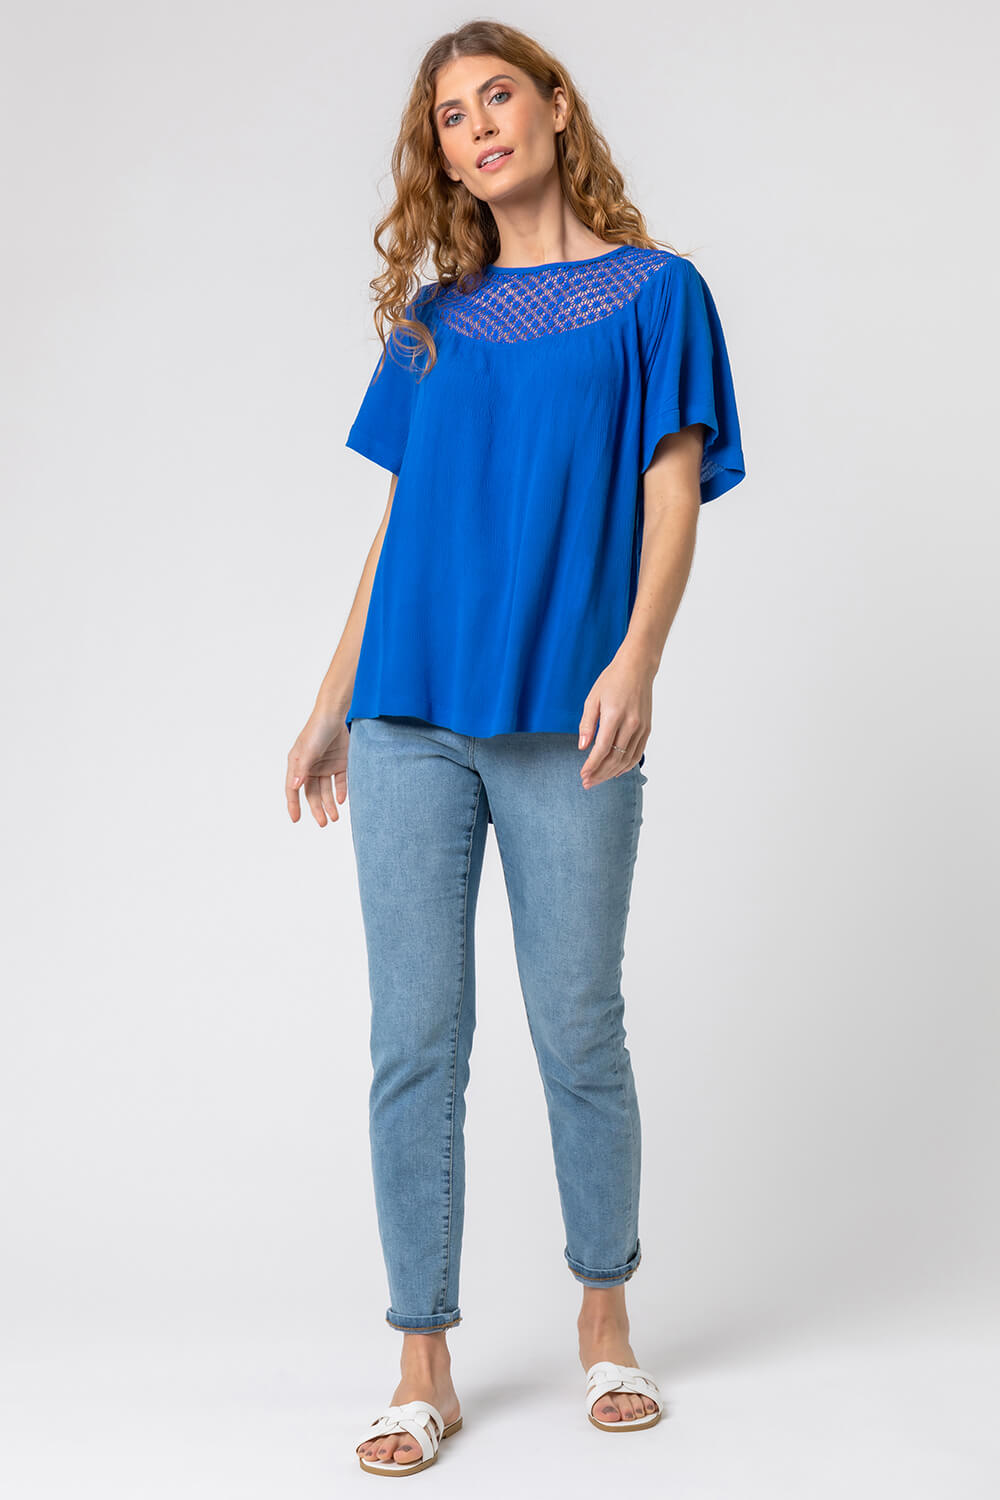 Royal Blue Lace Panel Tunic Top, Image 3 of 5